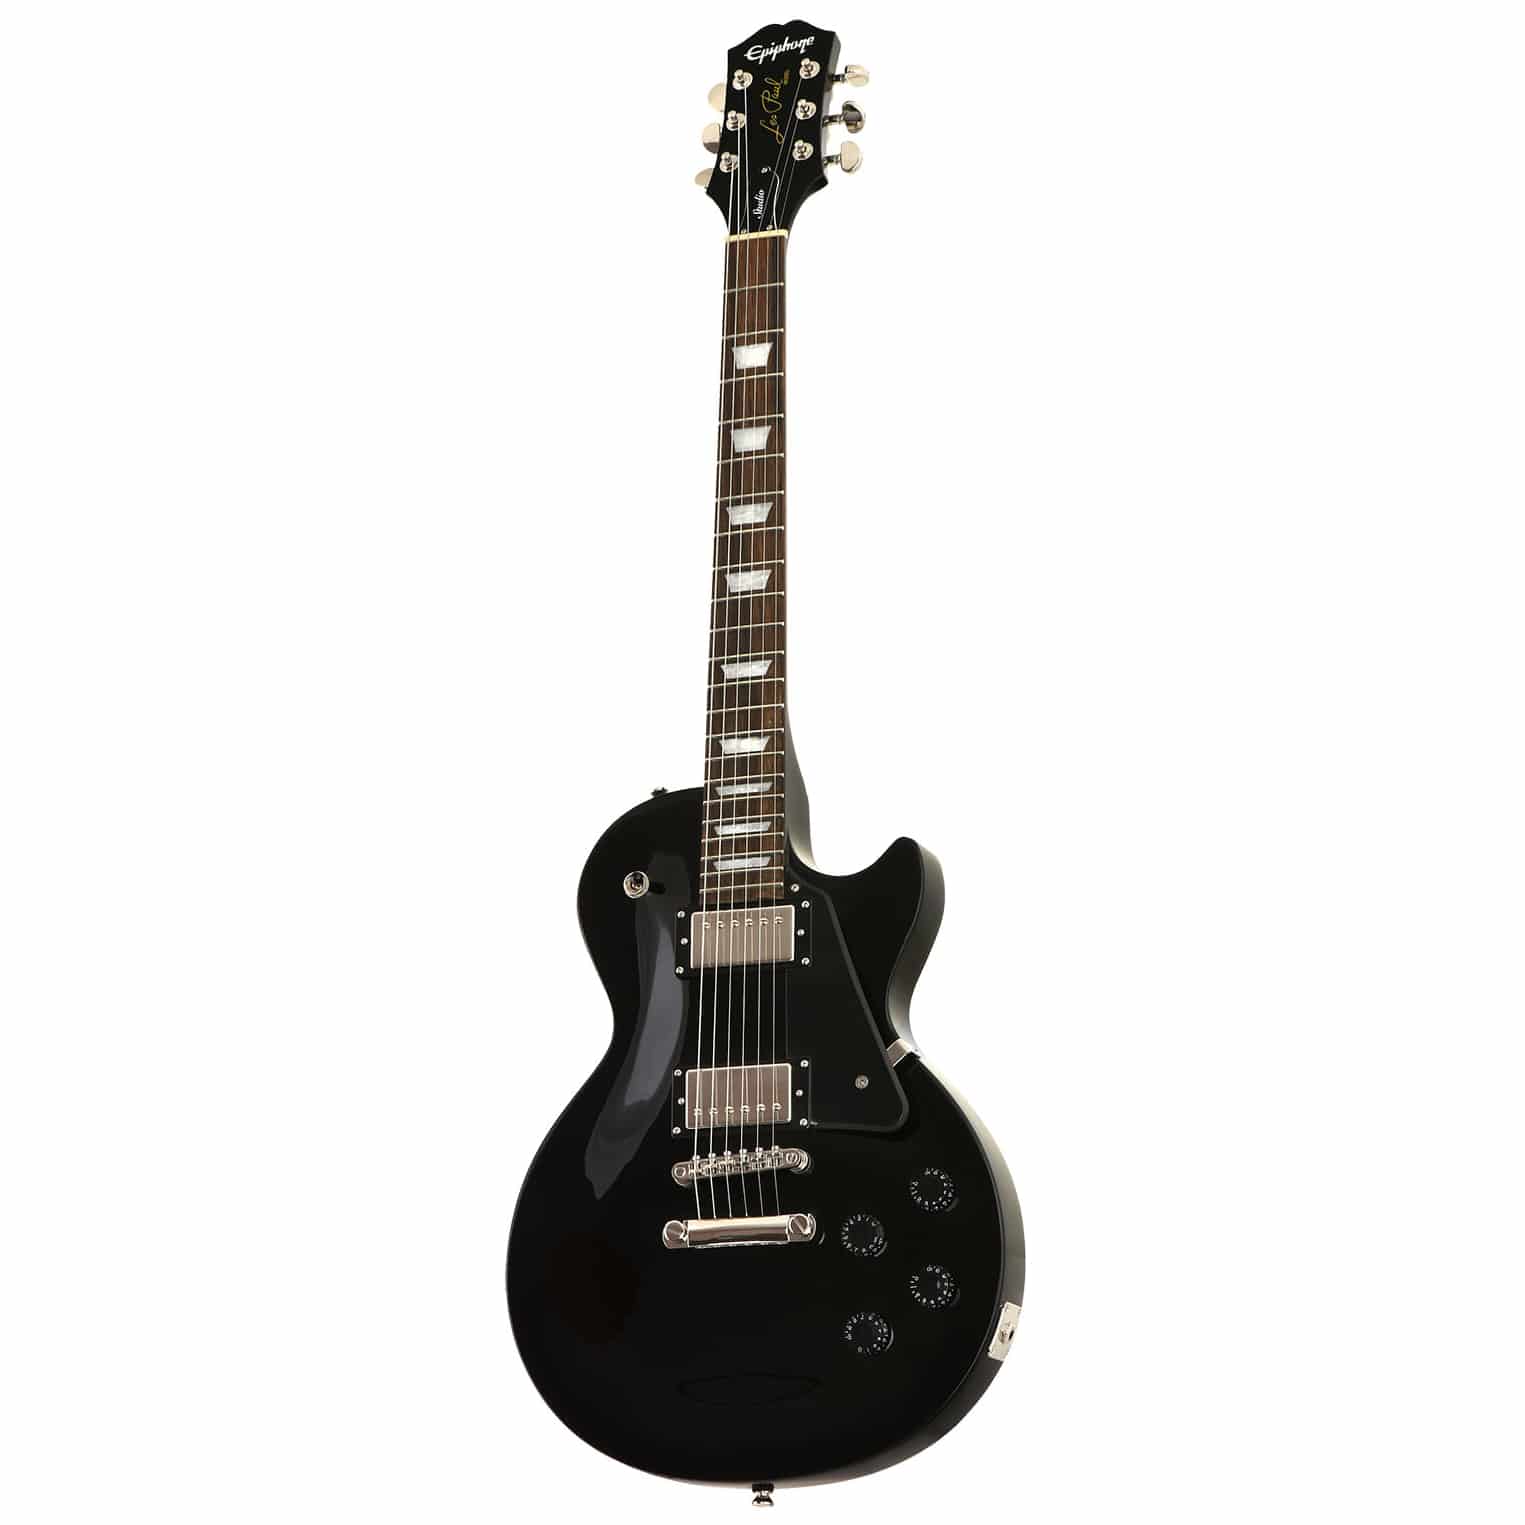 Epiphone Inspired by Gibson Les Paul Studio EB